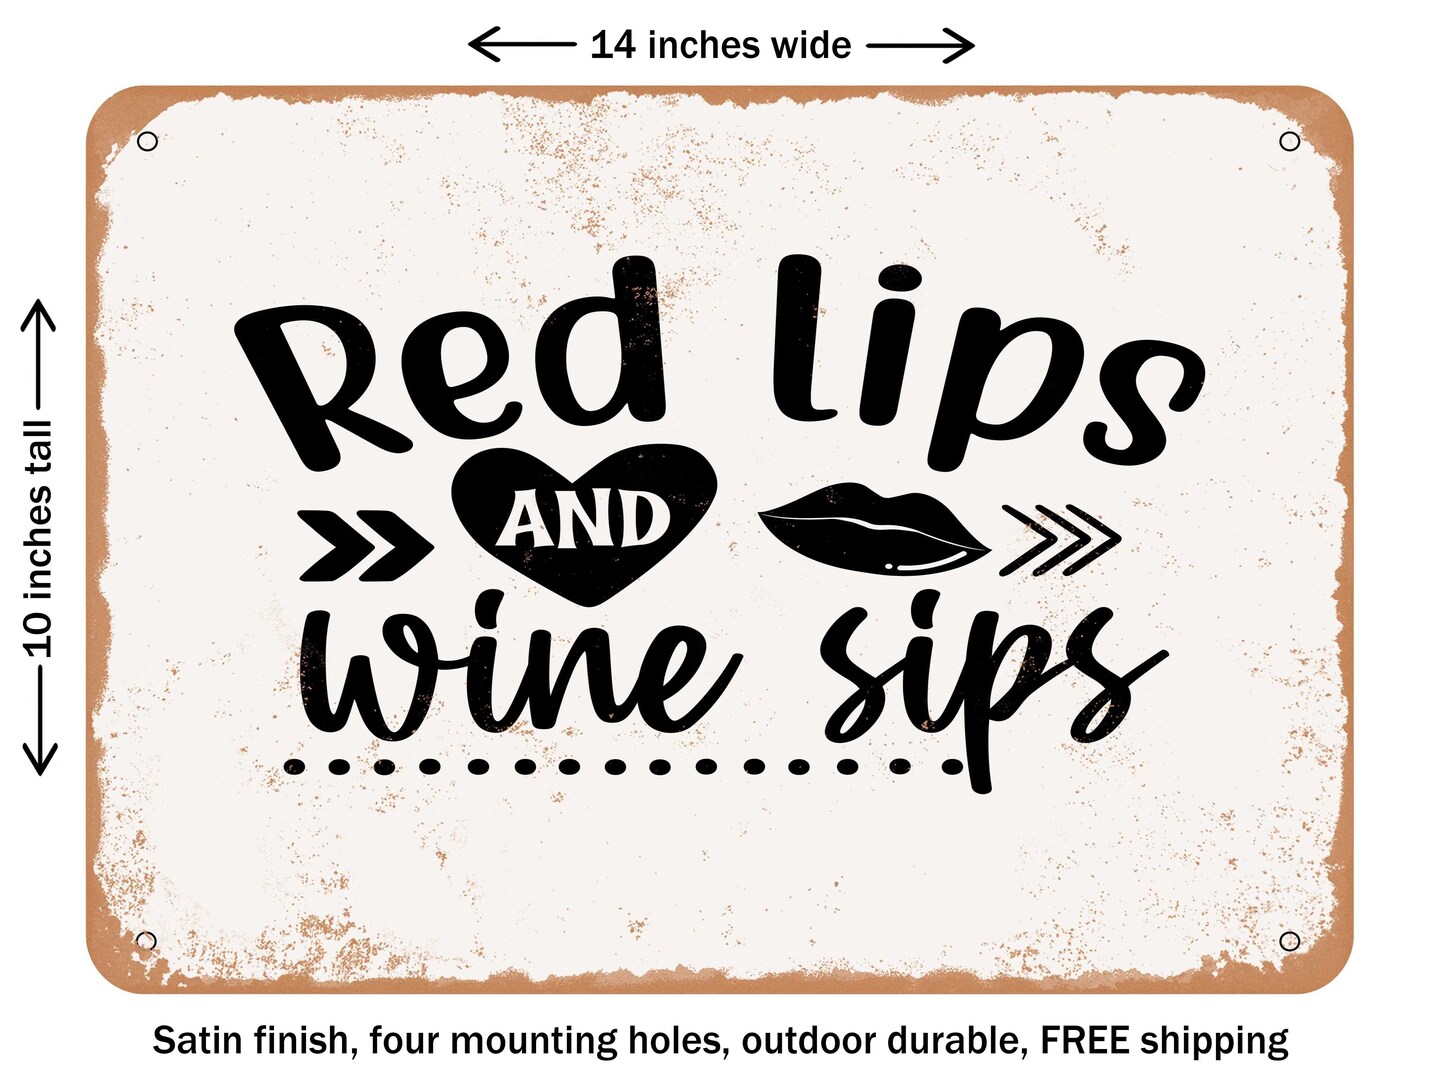 DECORATIVE METAL SIGN - Red Lips and Wine Sips - Vintage Rusty Look